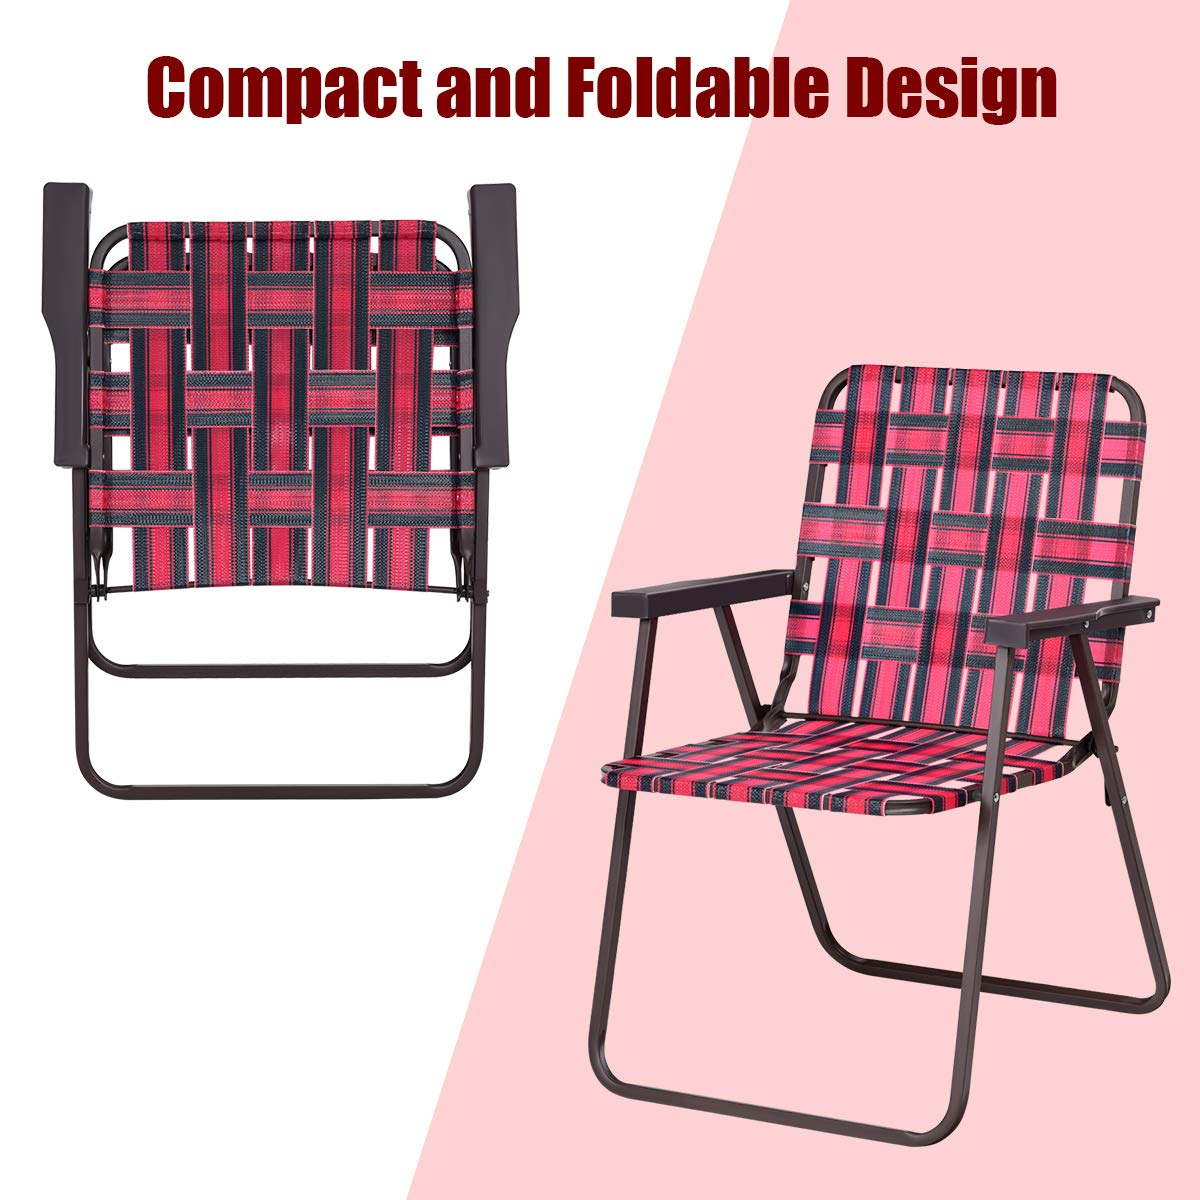 Giantex Folding Lawn Chairs Set of 6 Outdoor Portable Beach Chair W/Stable Steel Frame